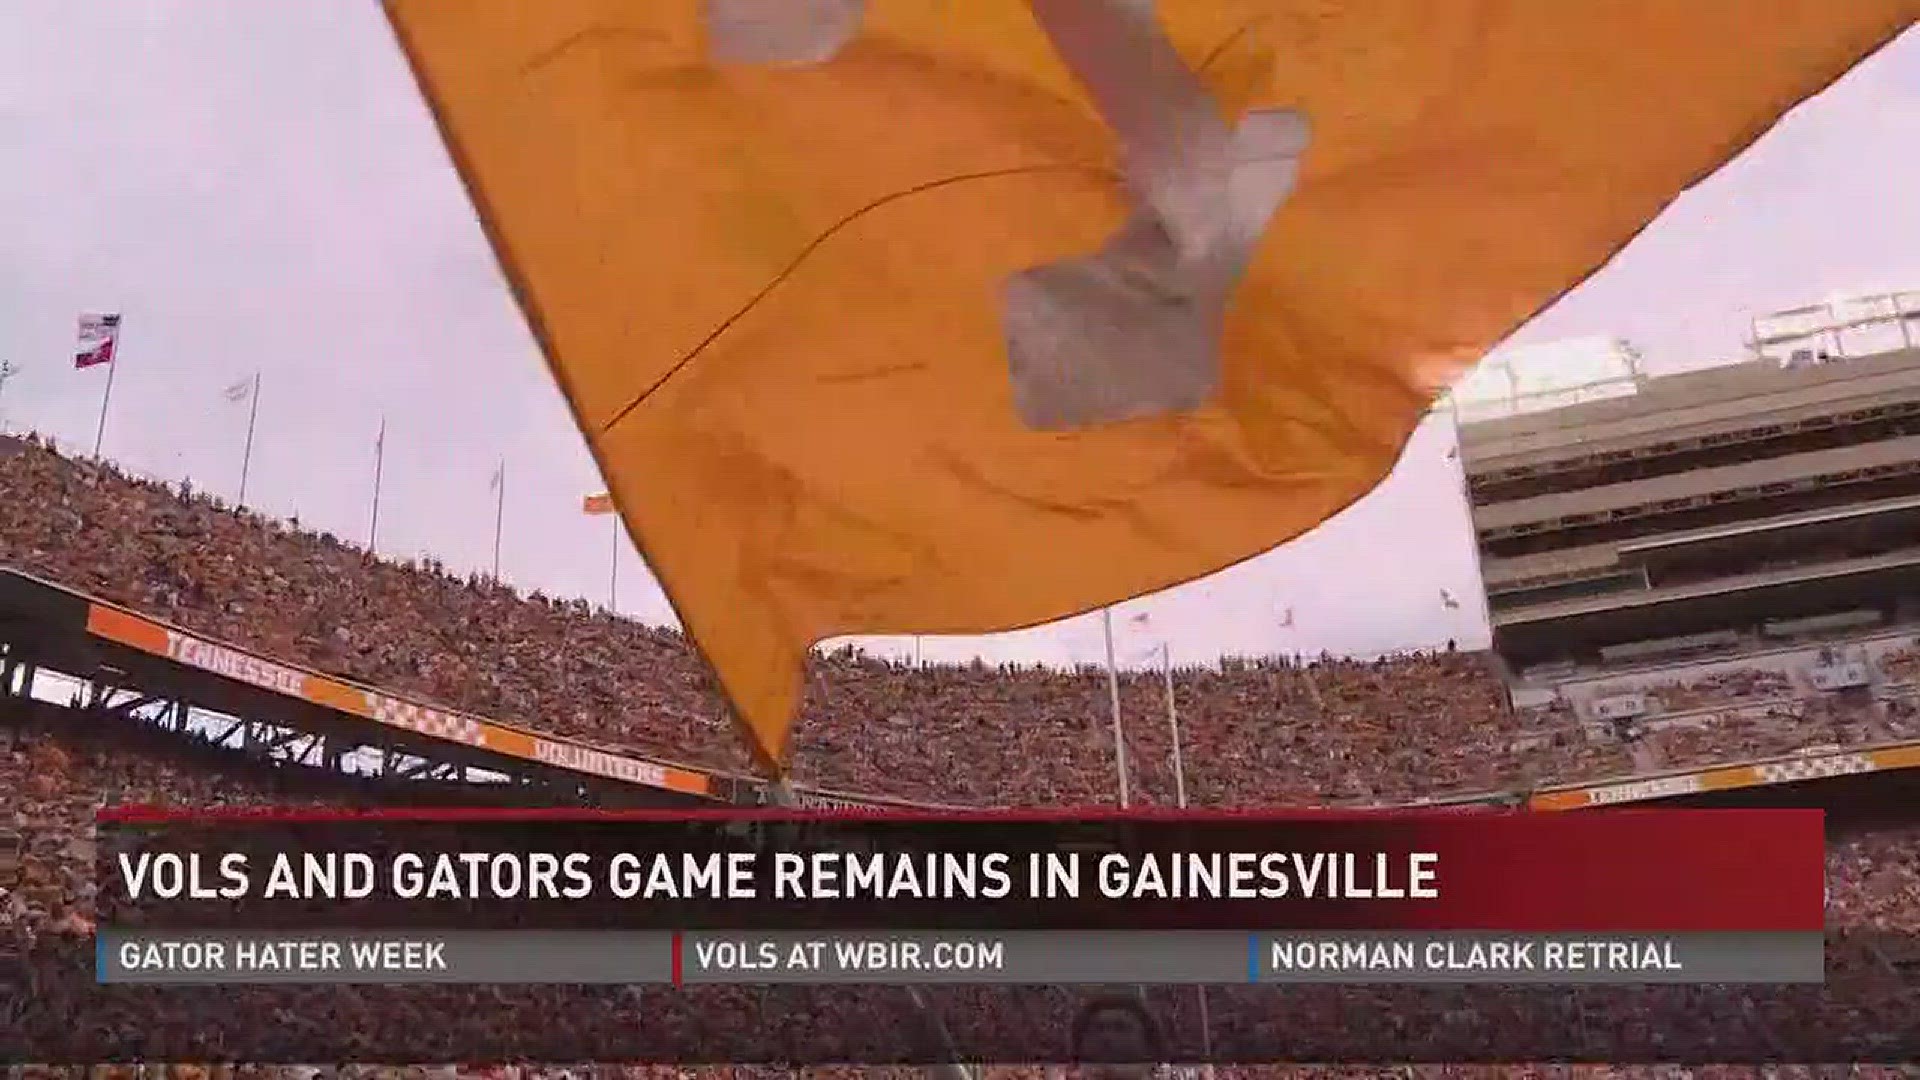 The SEC and Florida officials surveyed the damage in Gainesville and determined they could still host the SEC showdown.